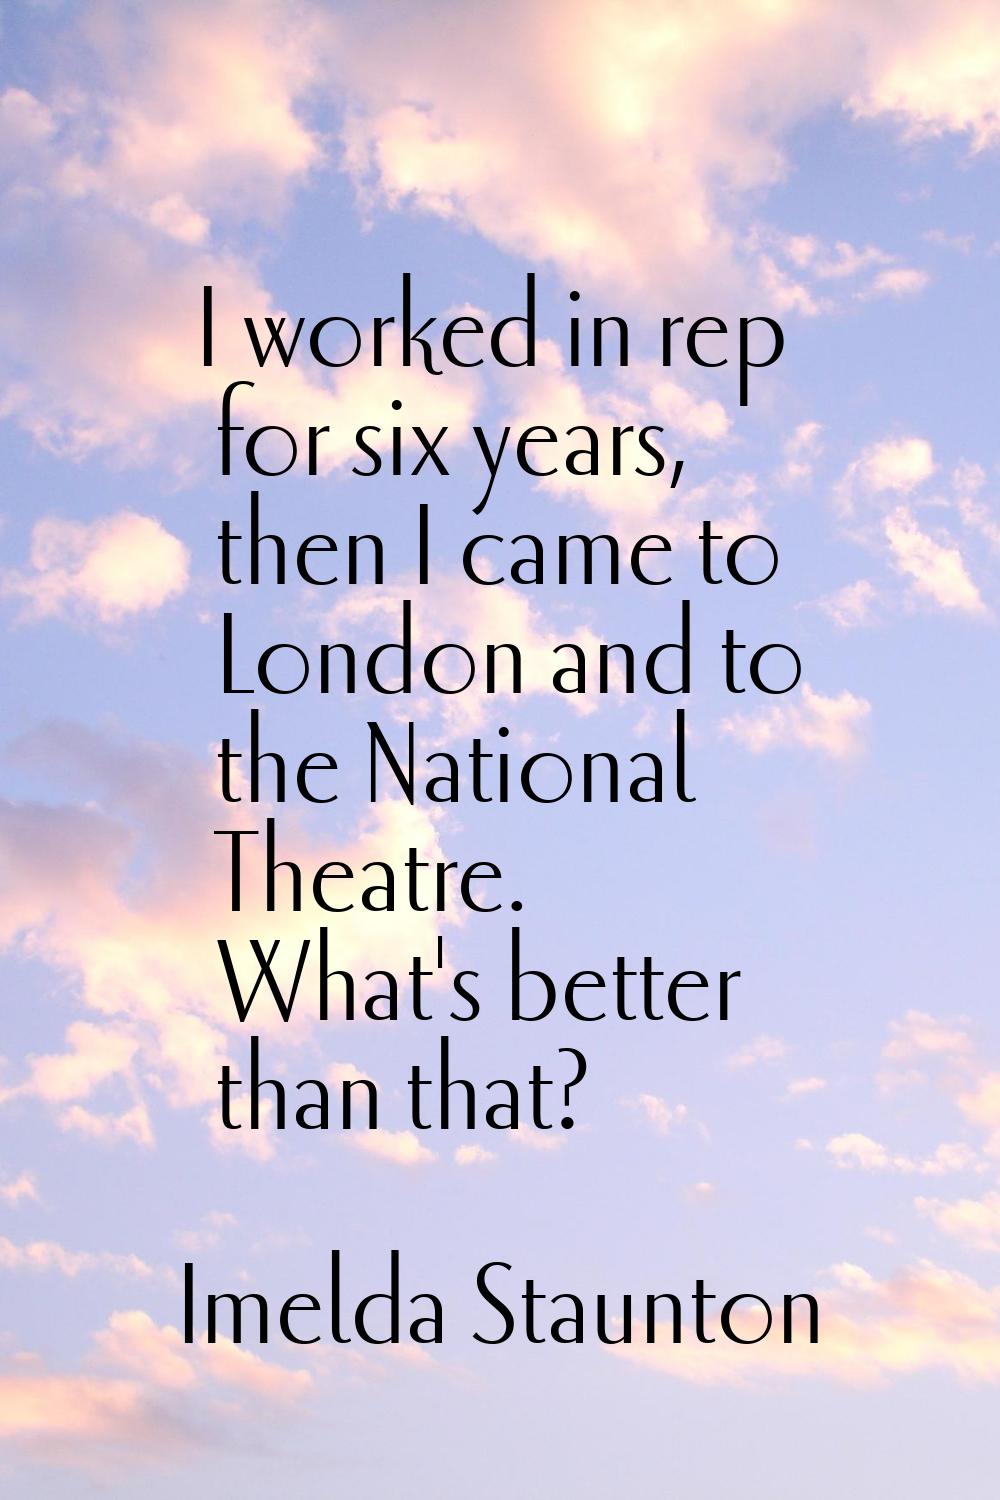 I worked in rep for six years, then I came to London and to the National Theatre. What's better tha